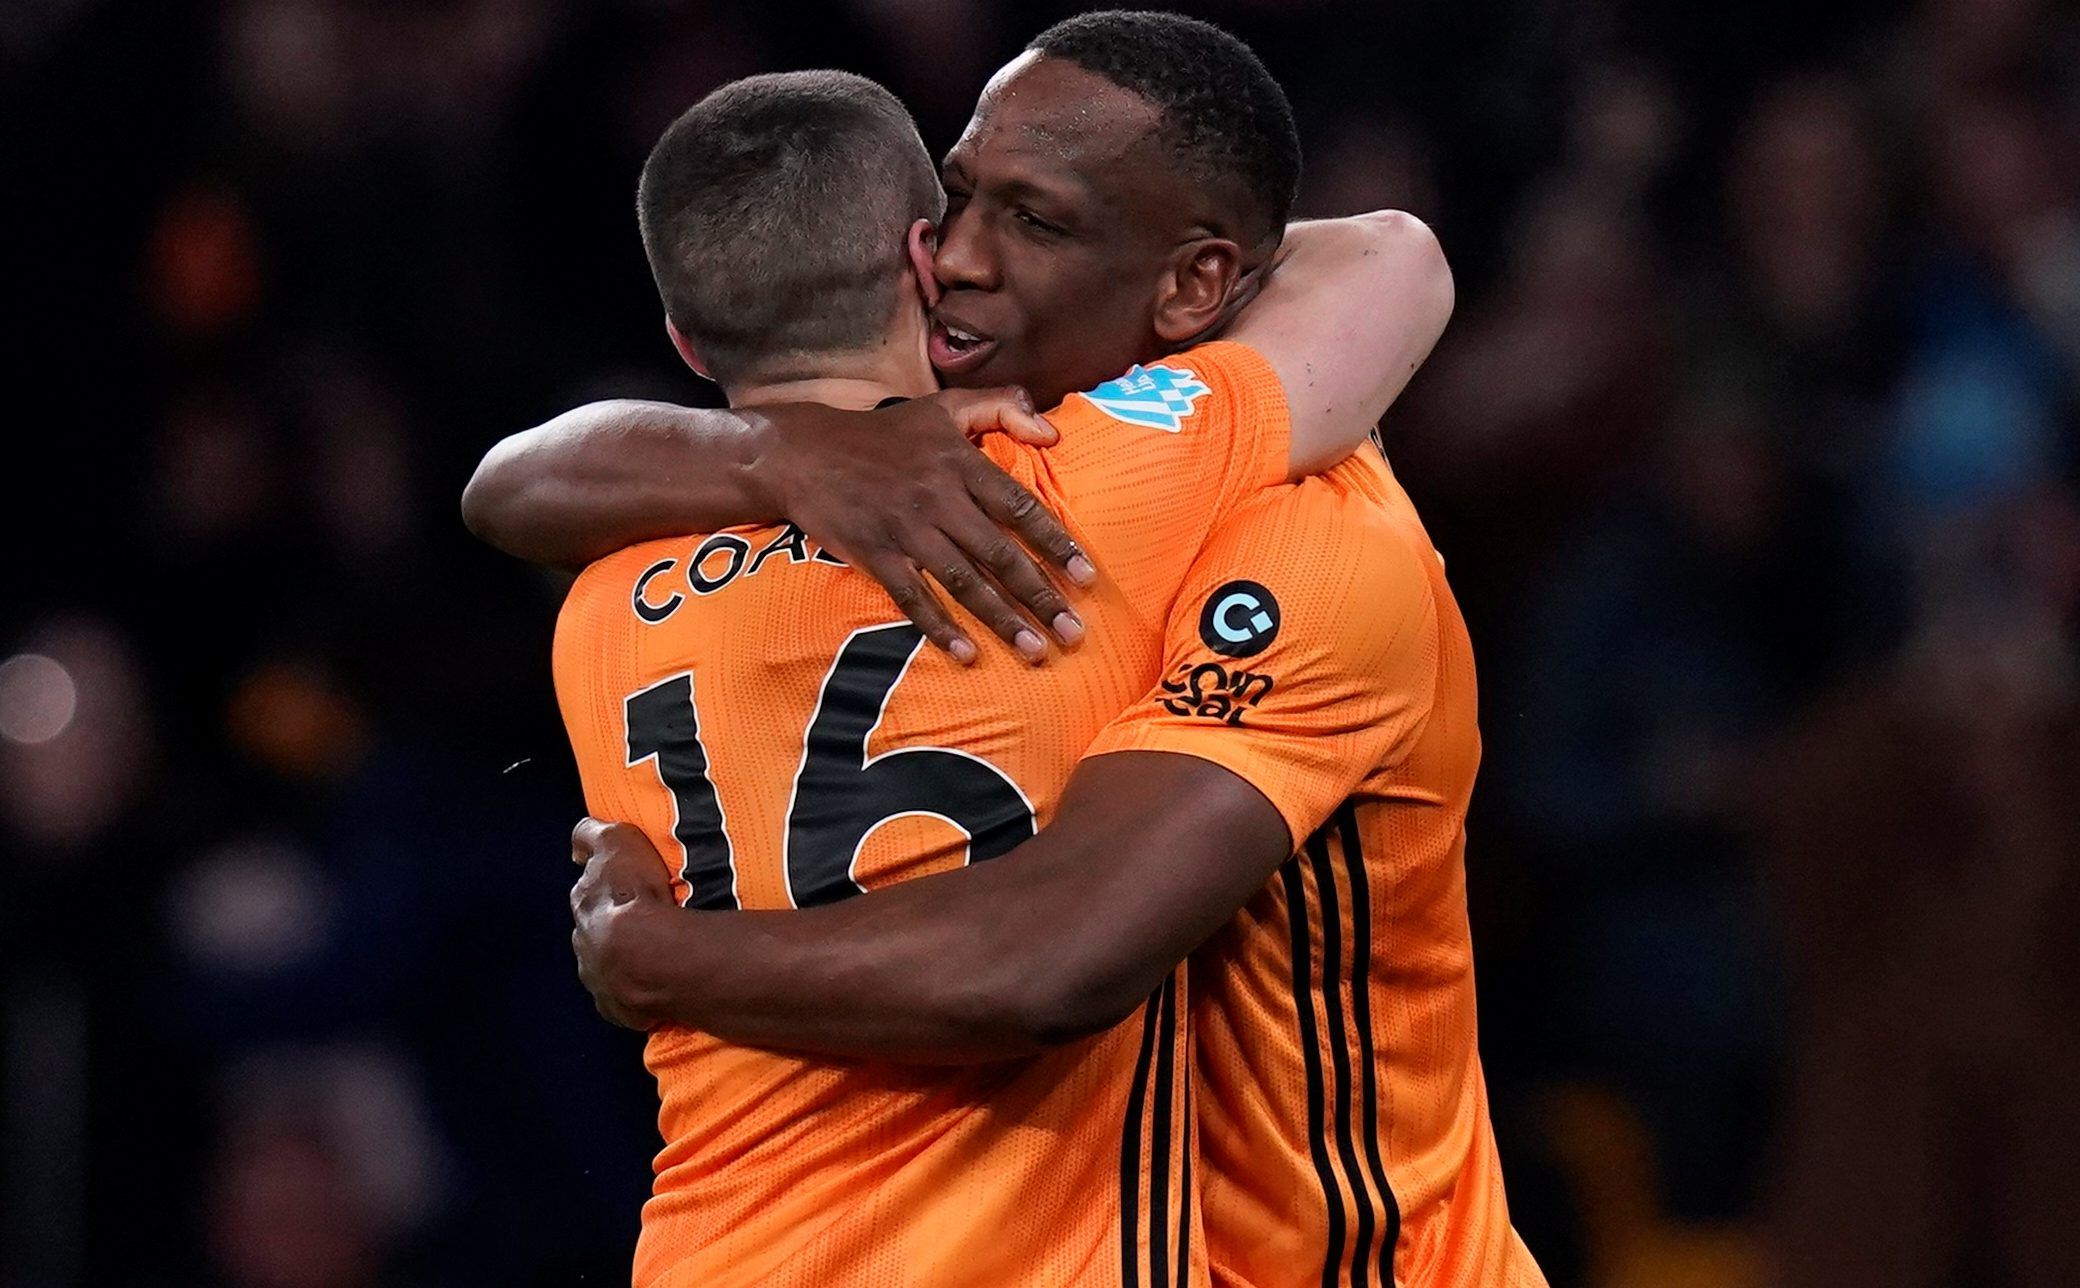 Soccer Football - Premier League - Wolverhampton Wanderers v Leicester City - Molineux Stadium, Wolverhampton, Britain - February 14, 2020  Wolverhampton Wanderers' Willy Boly celebrates scoring their first goal which is later disallowed by VAR for offside  REUTERS/Andrew Yates  EDITORIAL USE ONLY. No use with unauthorized audio, video, data, fixture lists, club/league logos or 